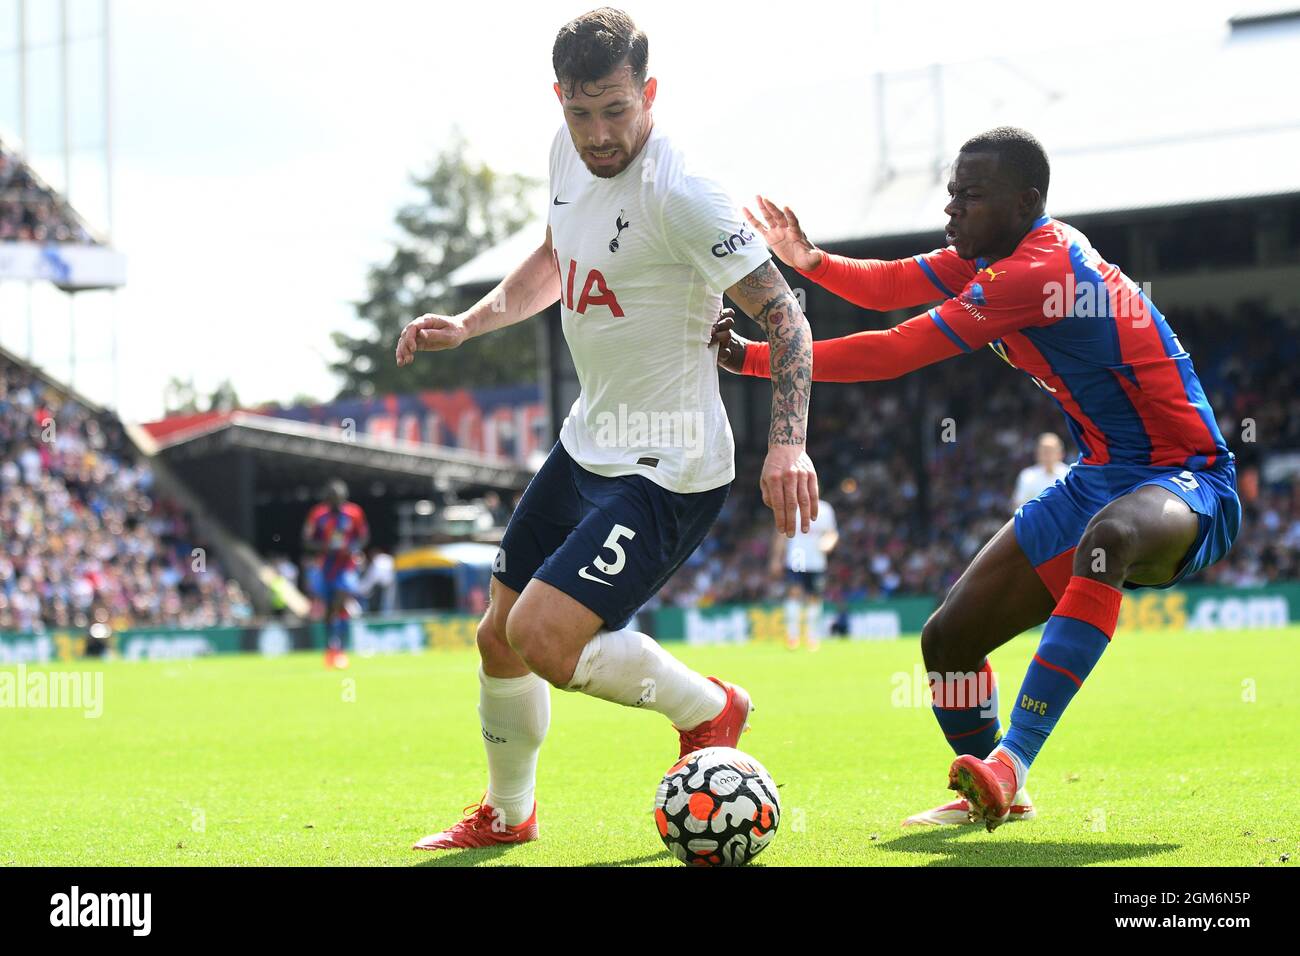 LONDON, ENGLAND - SEPTEMBER 11, 2021: Pierre-Emile Kordt Hojbjerg of Tottenham and Tyrick Kwon Mitchell of Palace pictured during the 2021/22 Premier League matchweek 4 game between Crystal Palace FC and Tottenham Hotspur FC at Selhurst Park. Copyright: Cosmin Iftode/Picstaff Stock Photo